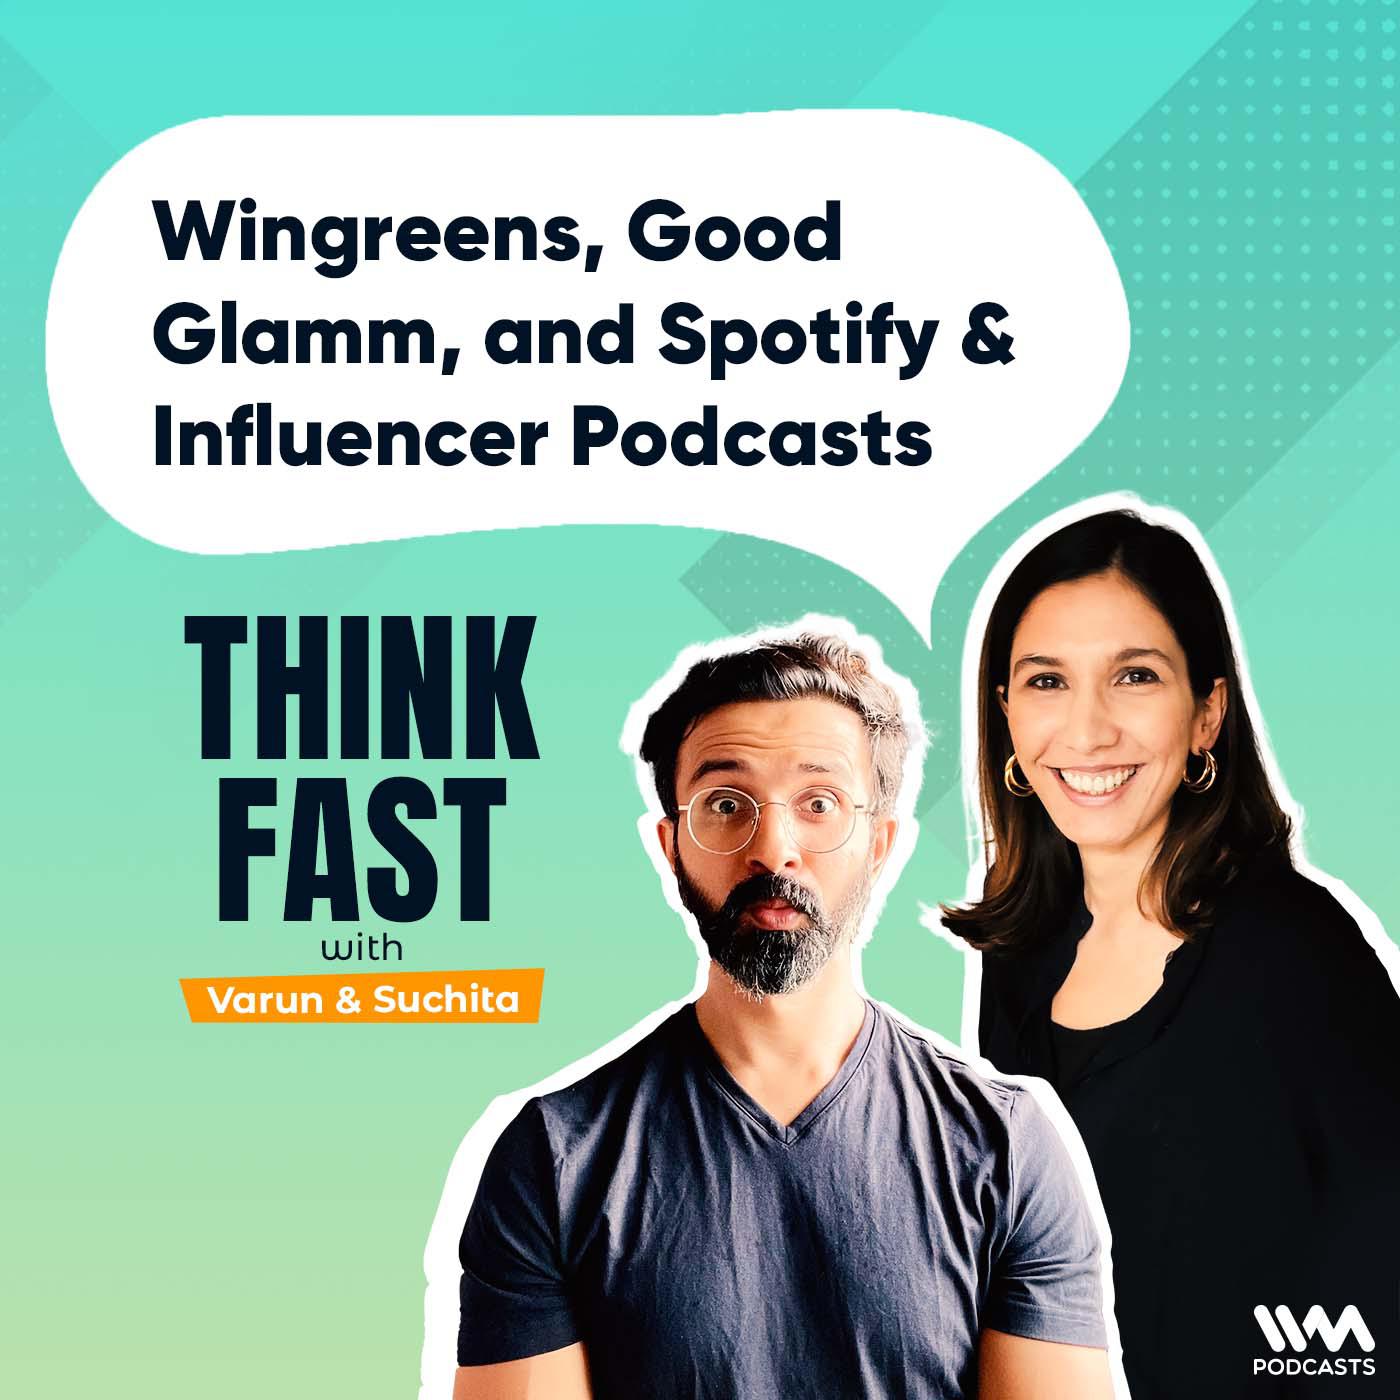 Wingreens, Good Glamm, and Spotify & Influencer Podcasts